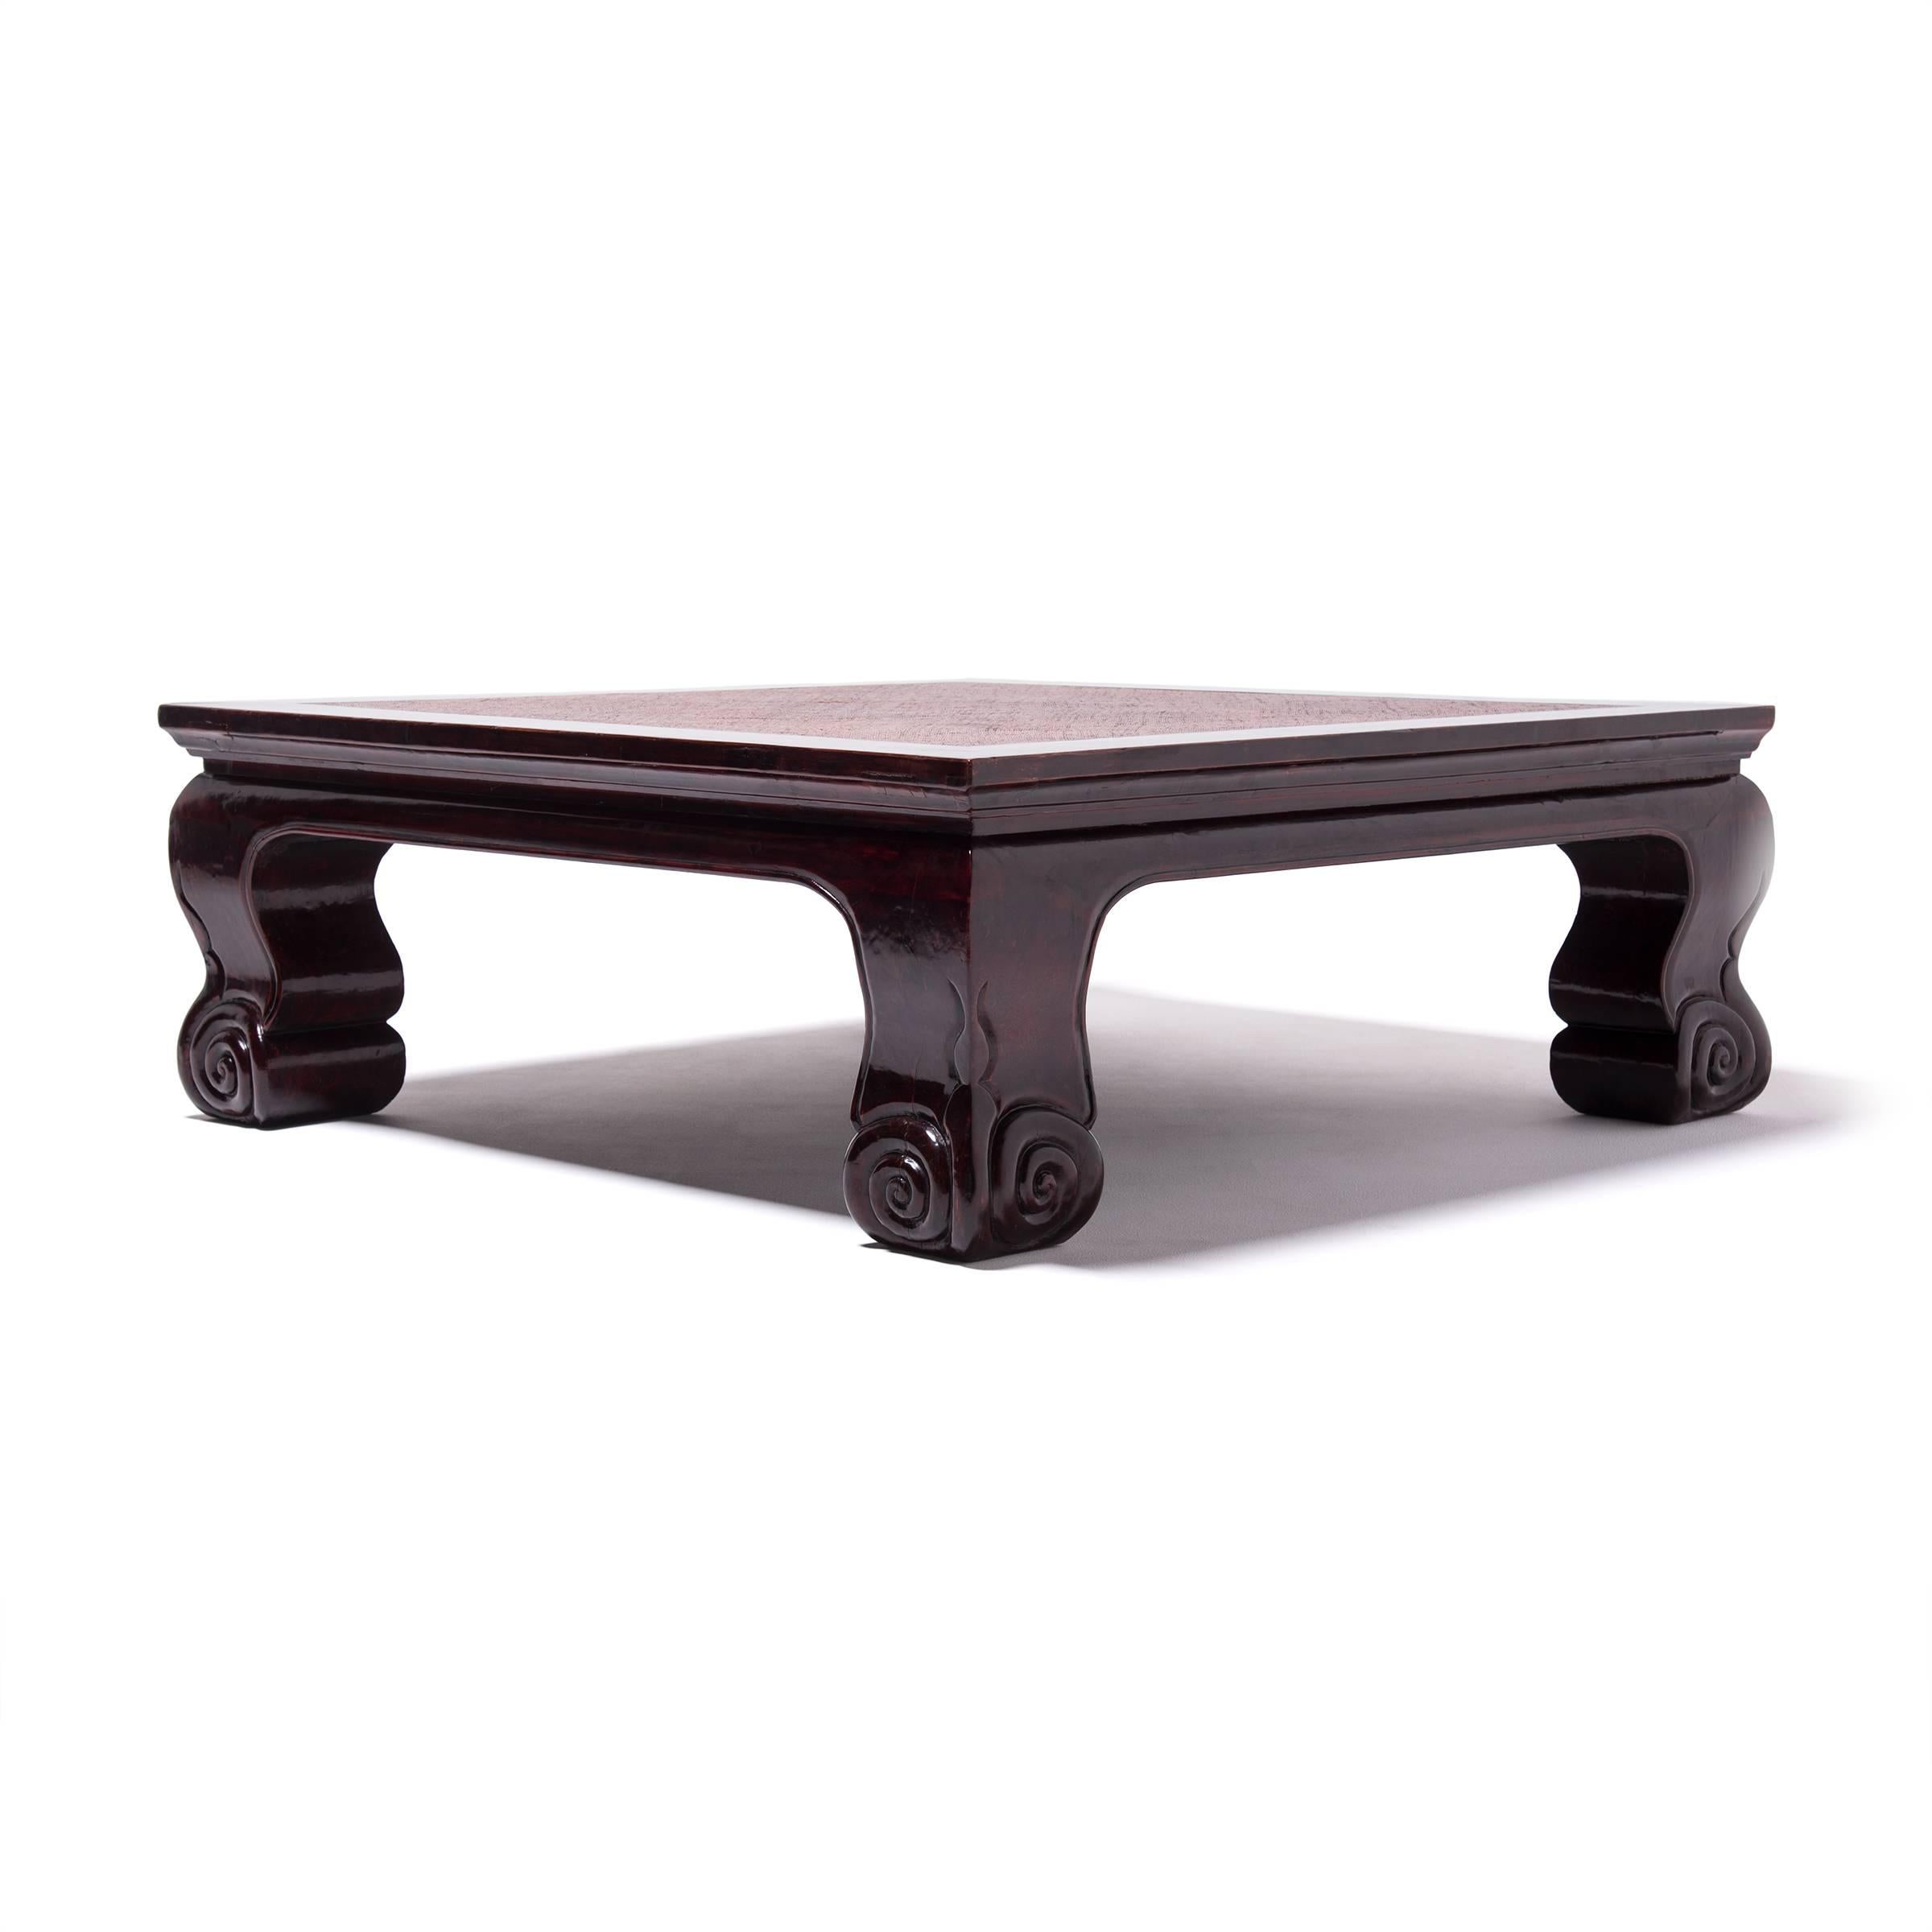 Luohan were popular in China for many centuries because their elegant form balanced beautifully with the sturdy, light weight design. The tables were easy to move from room to room but were usually placed in a scholar’s study or bedroom. The table